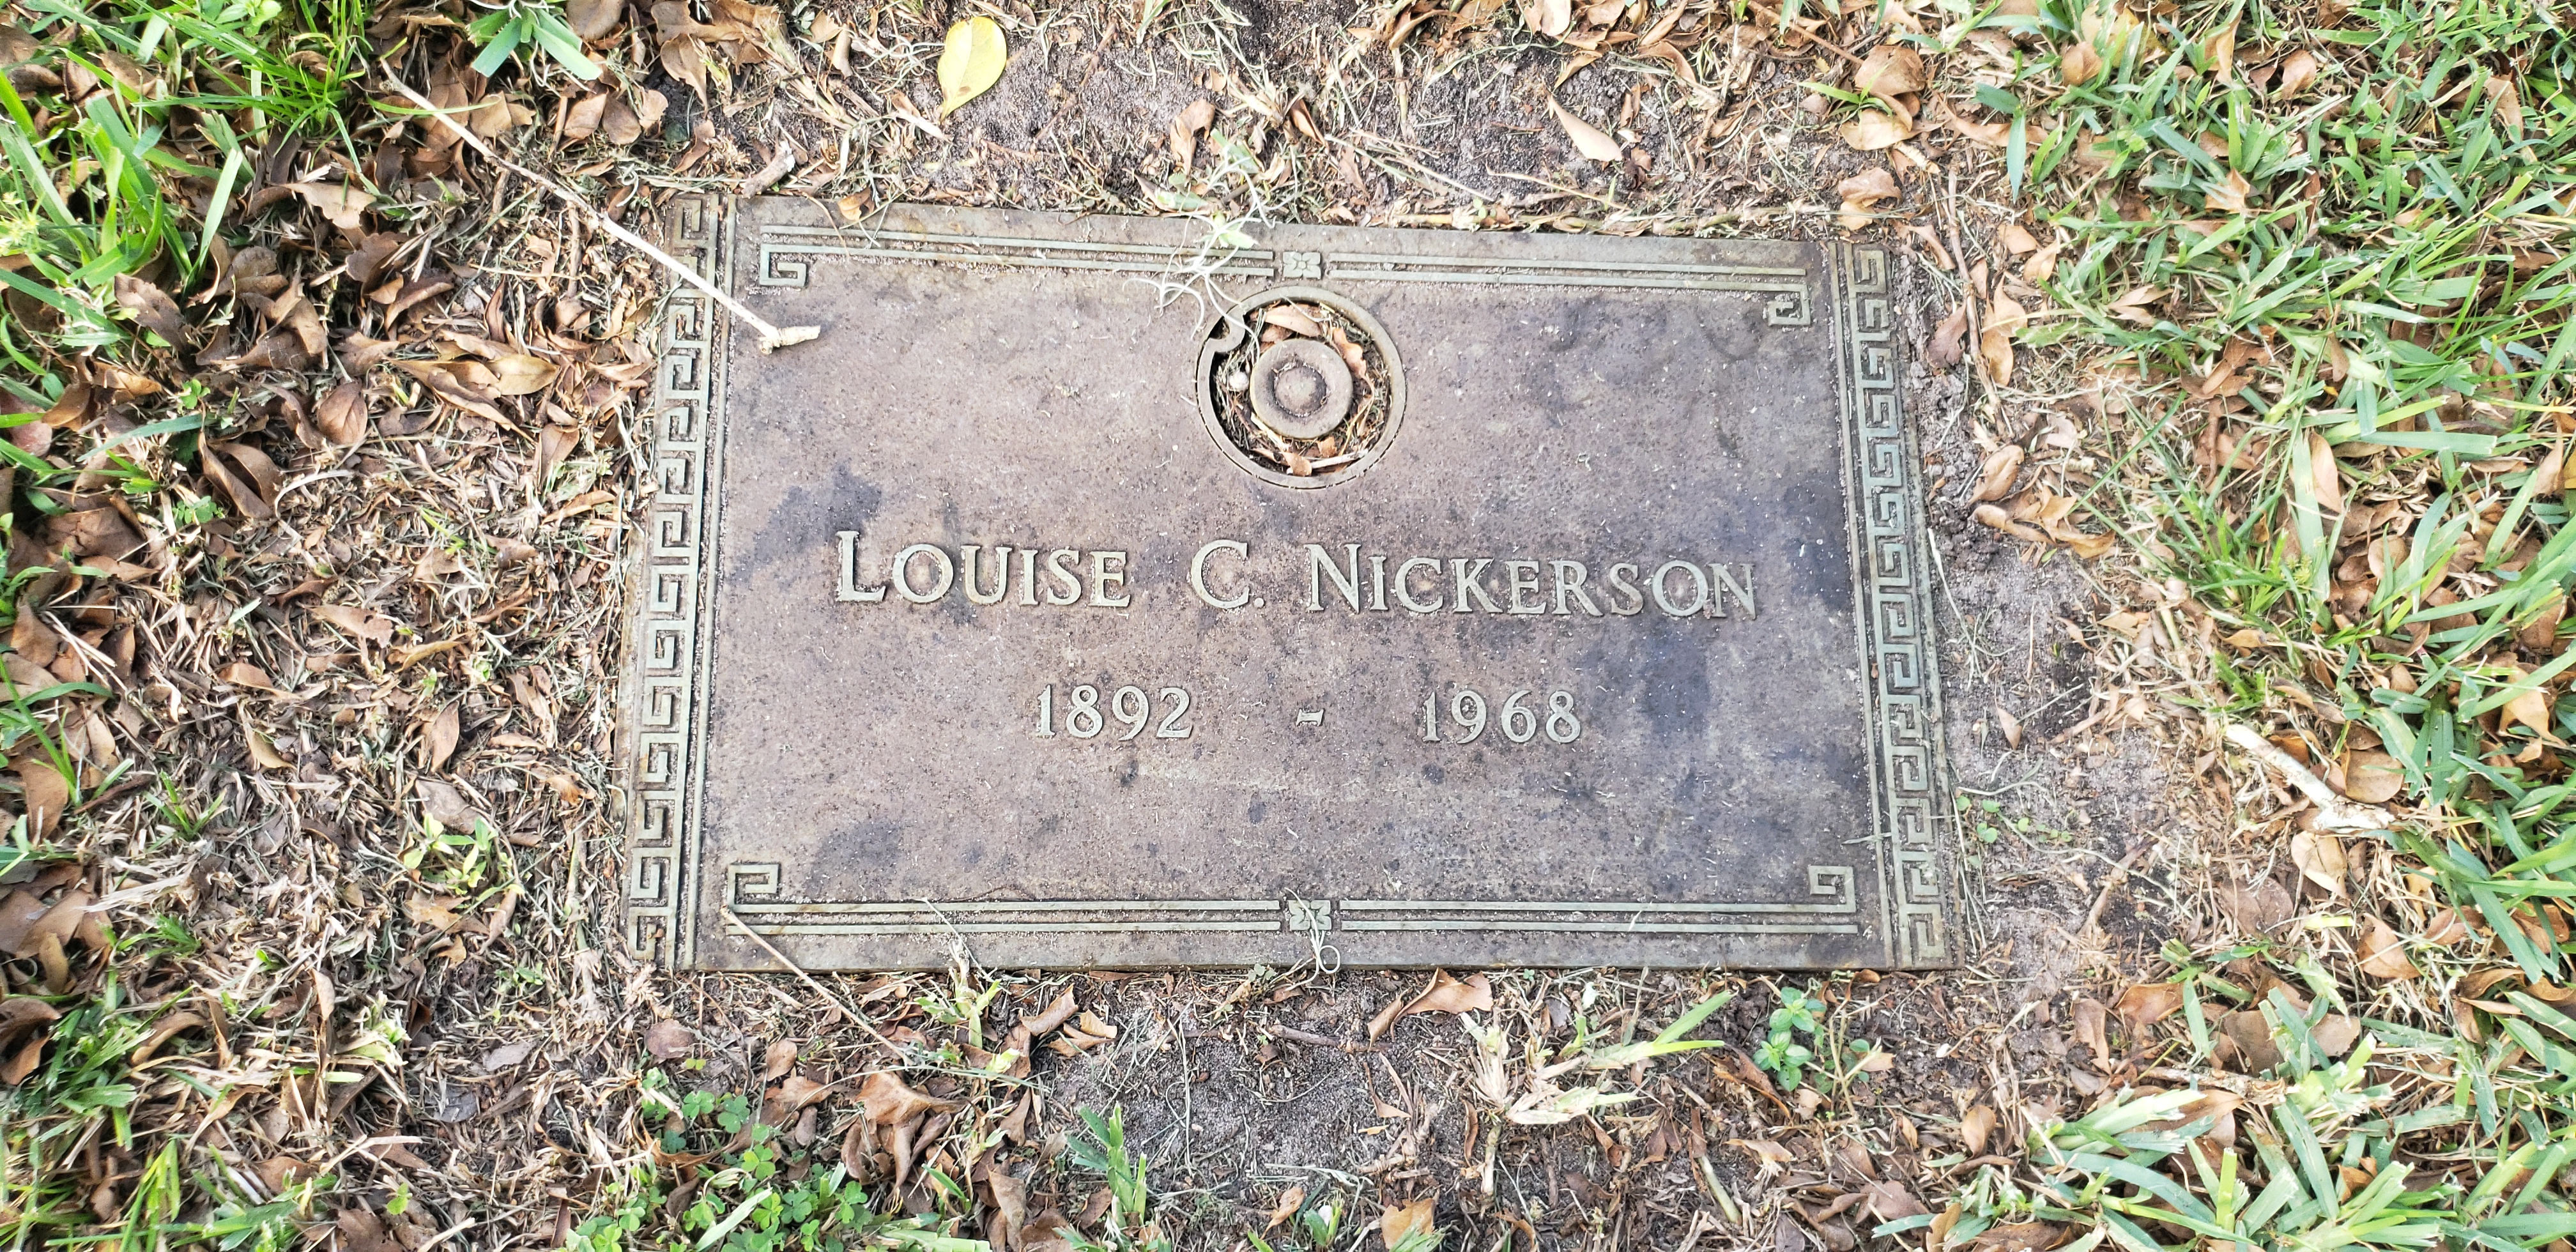 Louise C Nickerson